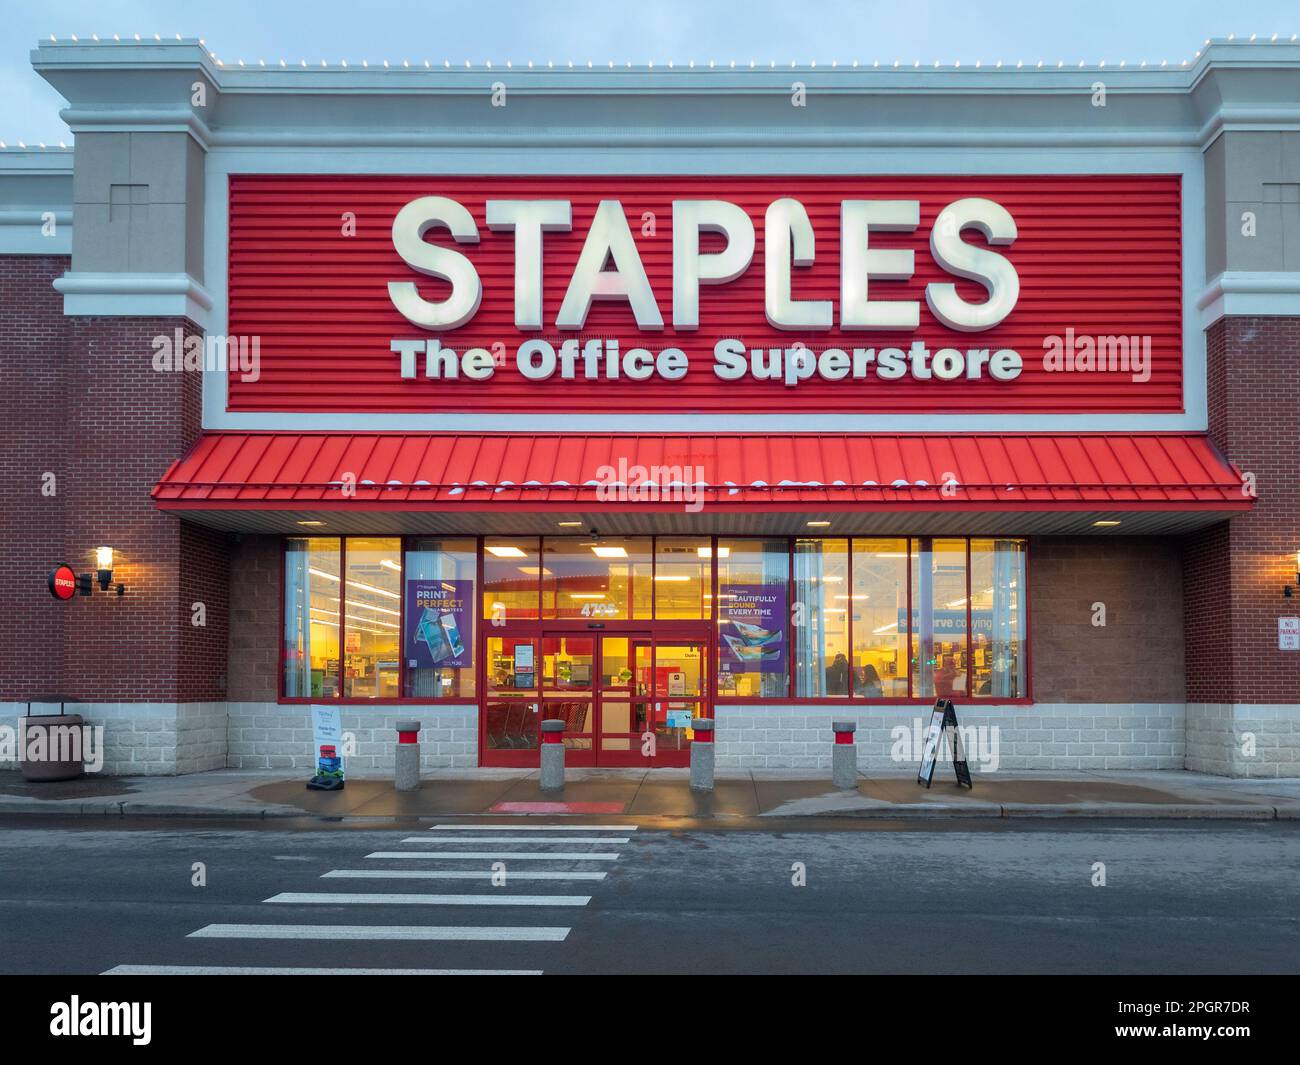 New Hartford, New York - Jan 27, 2023: Landscape Close-up View of Staples The Office Superstore Building Entrance and Signage. Stock Photo